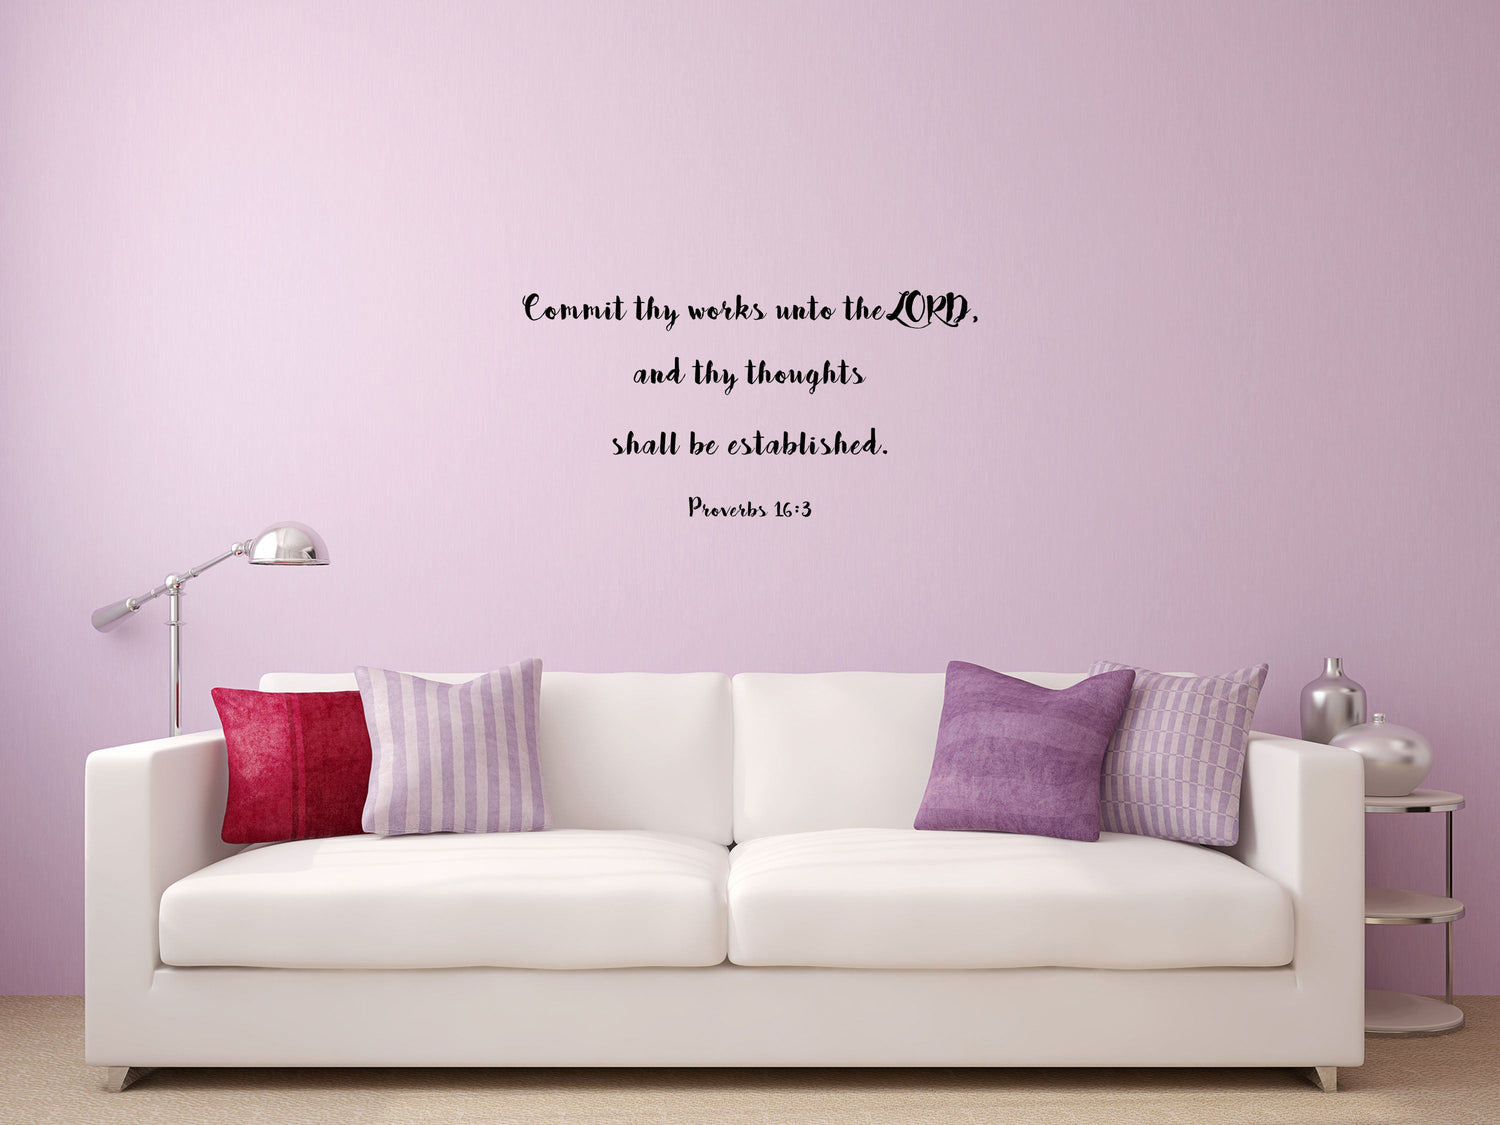 Proverbs 16:3 Christian KJV Wall Decal Sticker - Commit Thy Works Unto The Lord Scripture - Proverbs Wall Decal - Religious Wall Decal Vinyl Wall Decal Title Done 